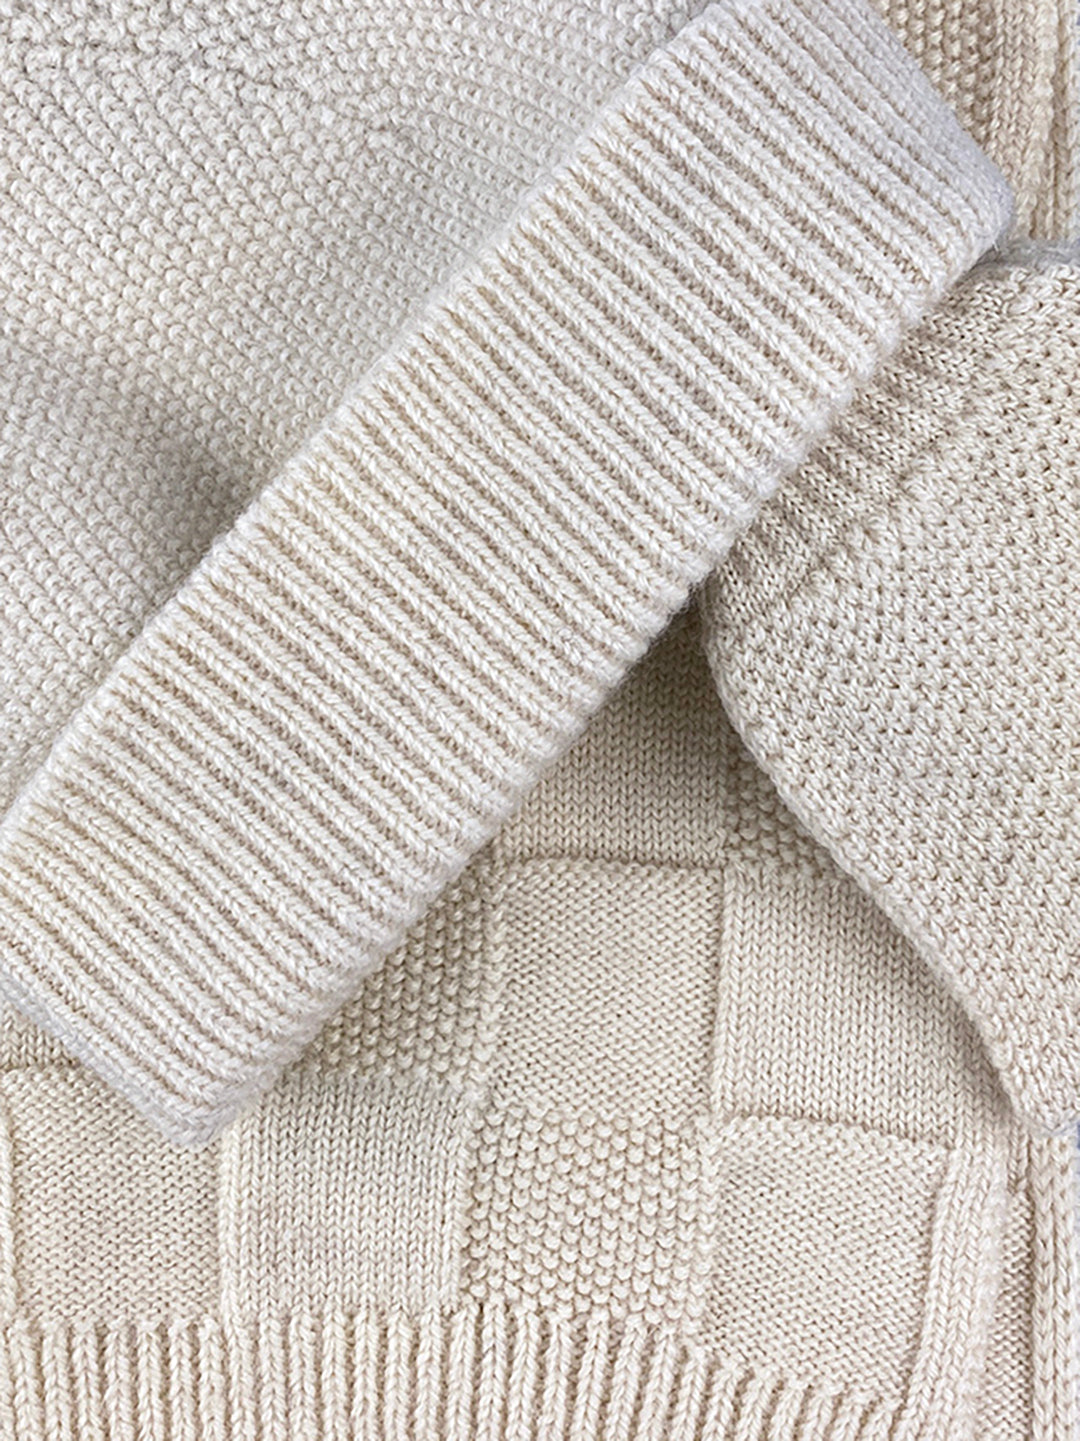 Cuillin set natural white undyed british wool knitted in Ayrshire. Scottish Textiles Showcase.